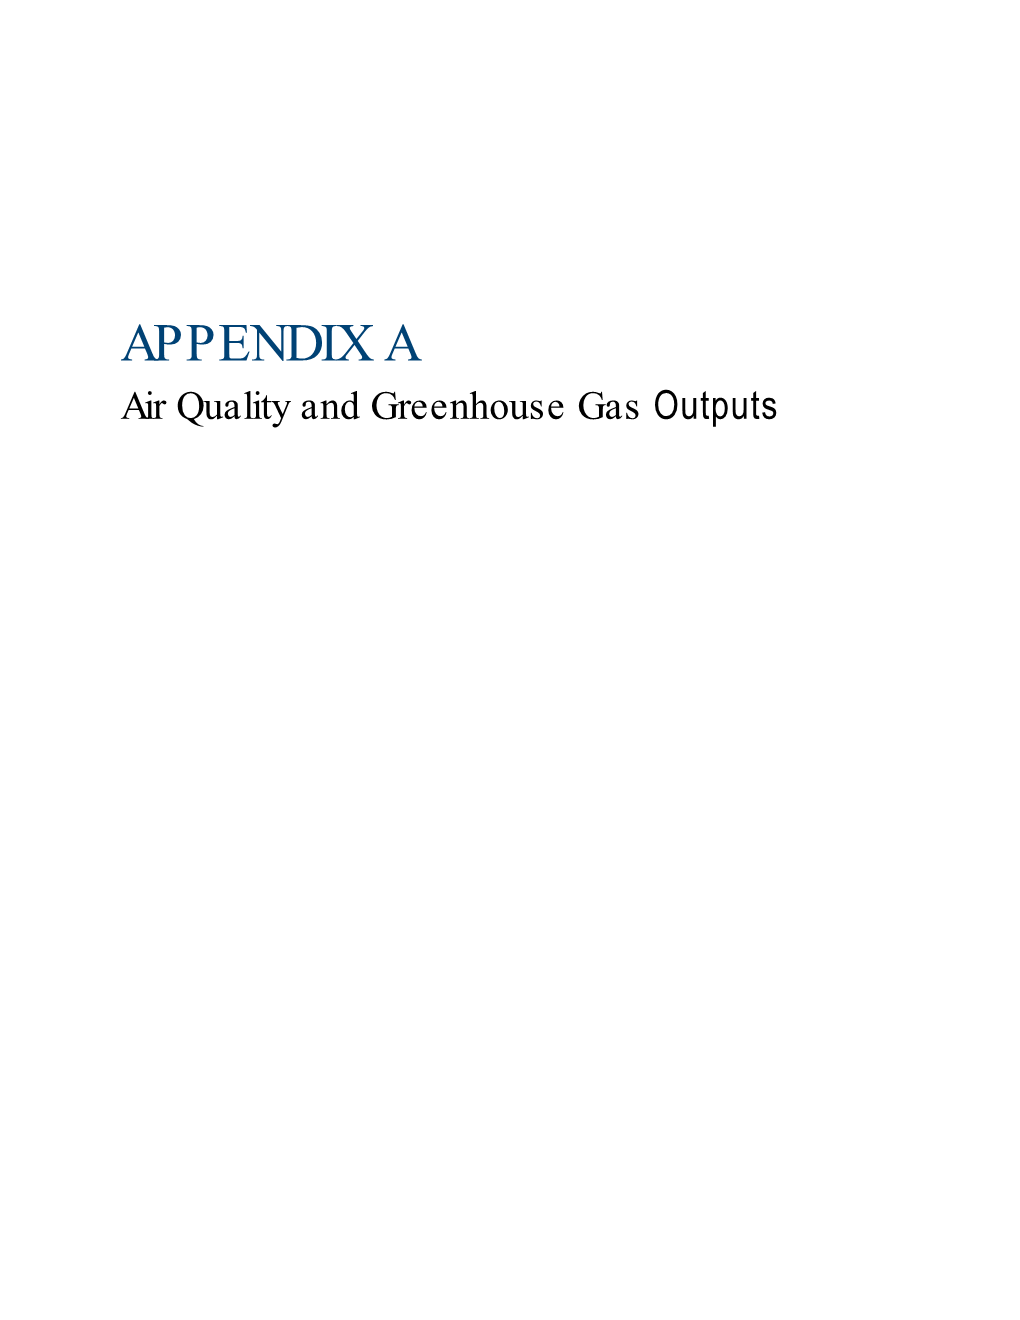 APPENDIX a Air Quality and Greenhouse Gas Outputs